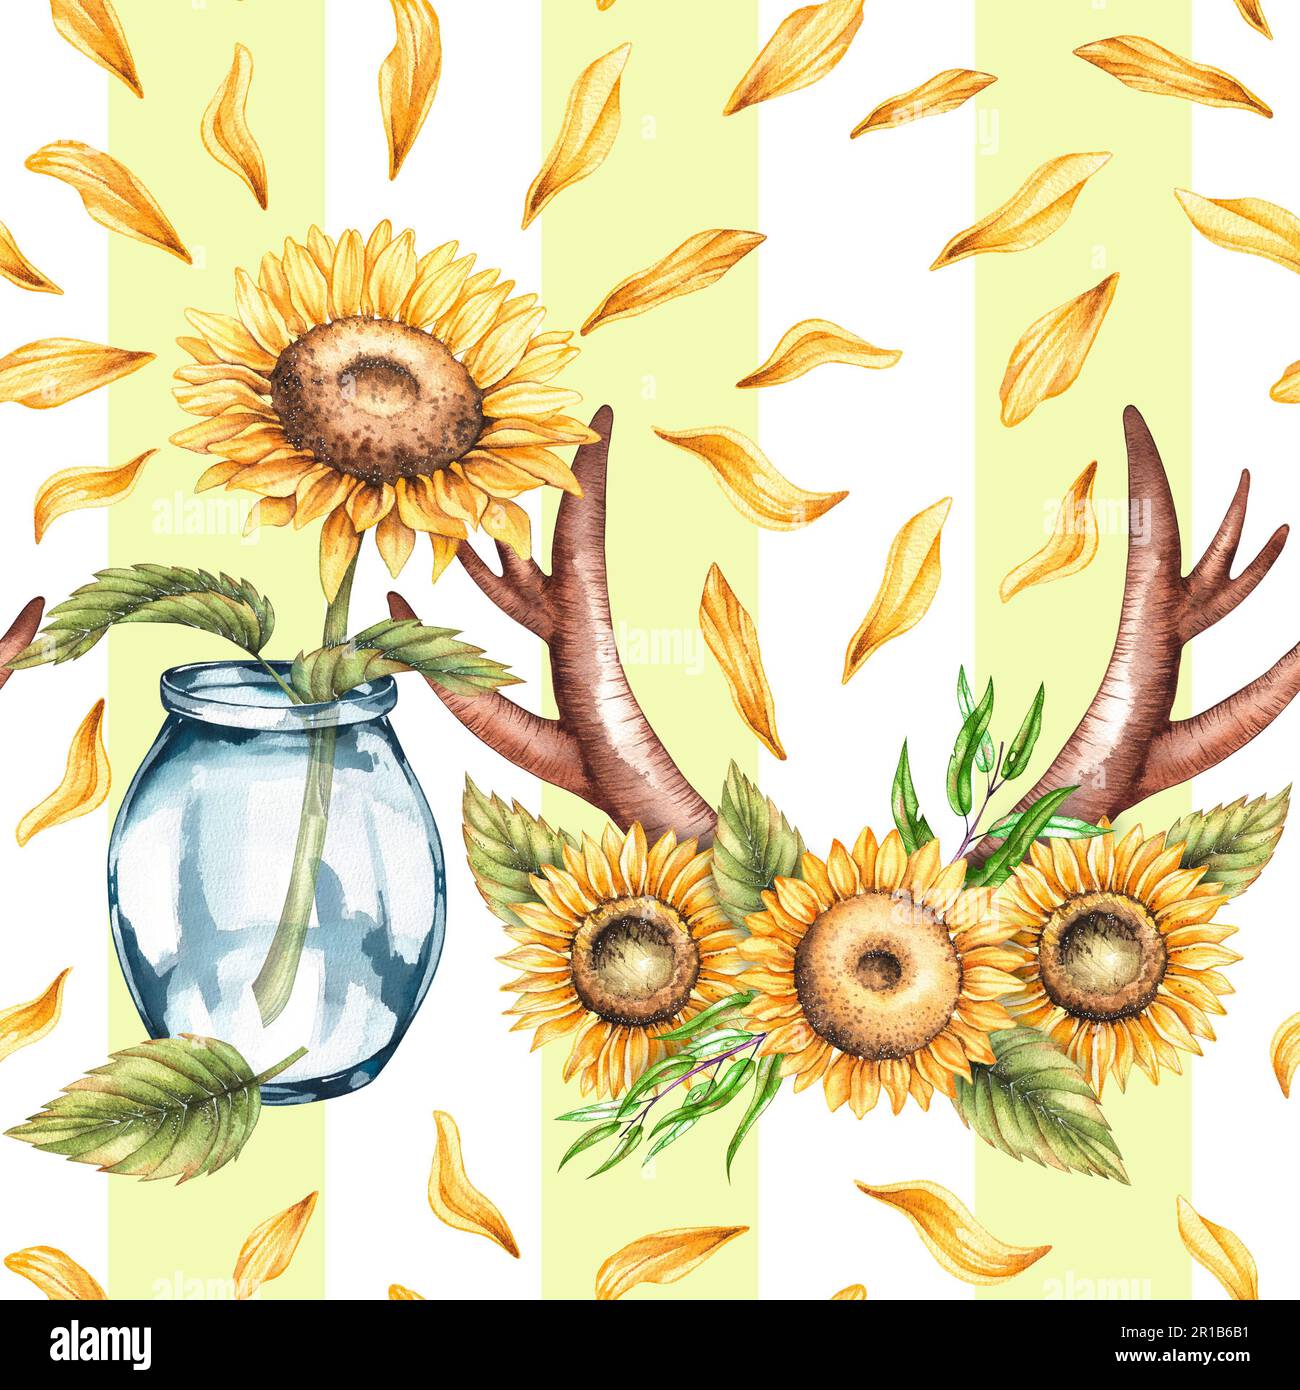 Watercolor sunflower pattern with horns, sunflower bouquet, glass vase on a striped background for the design of textiles, fabrics, wallpapers, invita Stock Photo